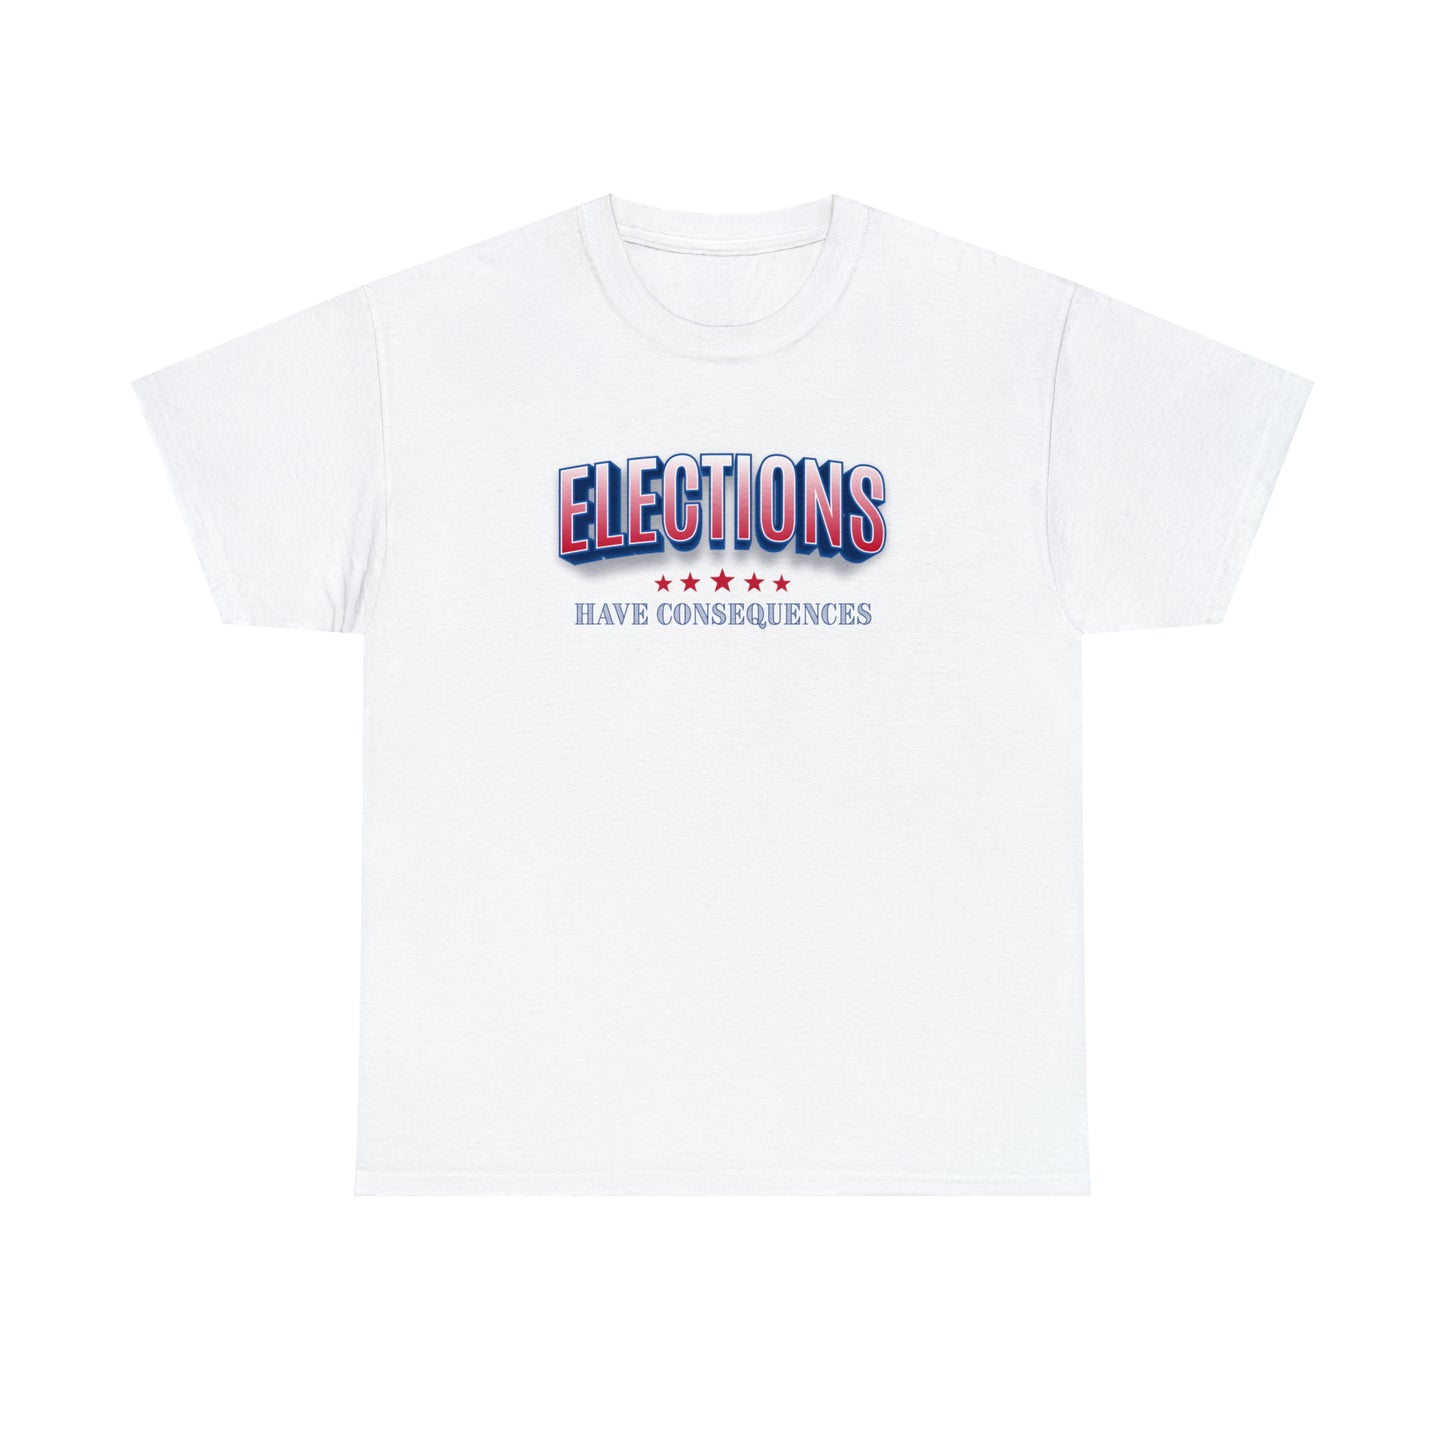 Elections T-Shirt For Election Squad Voter TShirt For Election Day T Shirt Political Shirt For Election Campaign Tee For Voter Registration